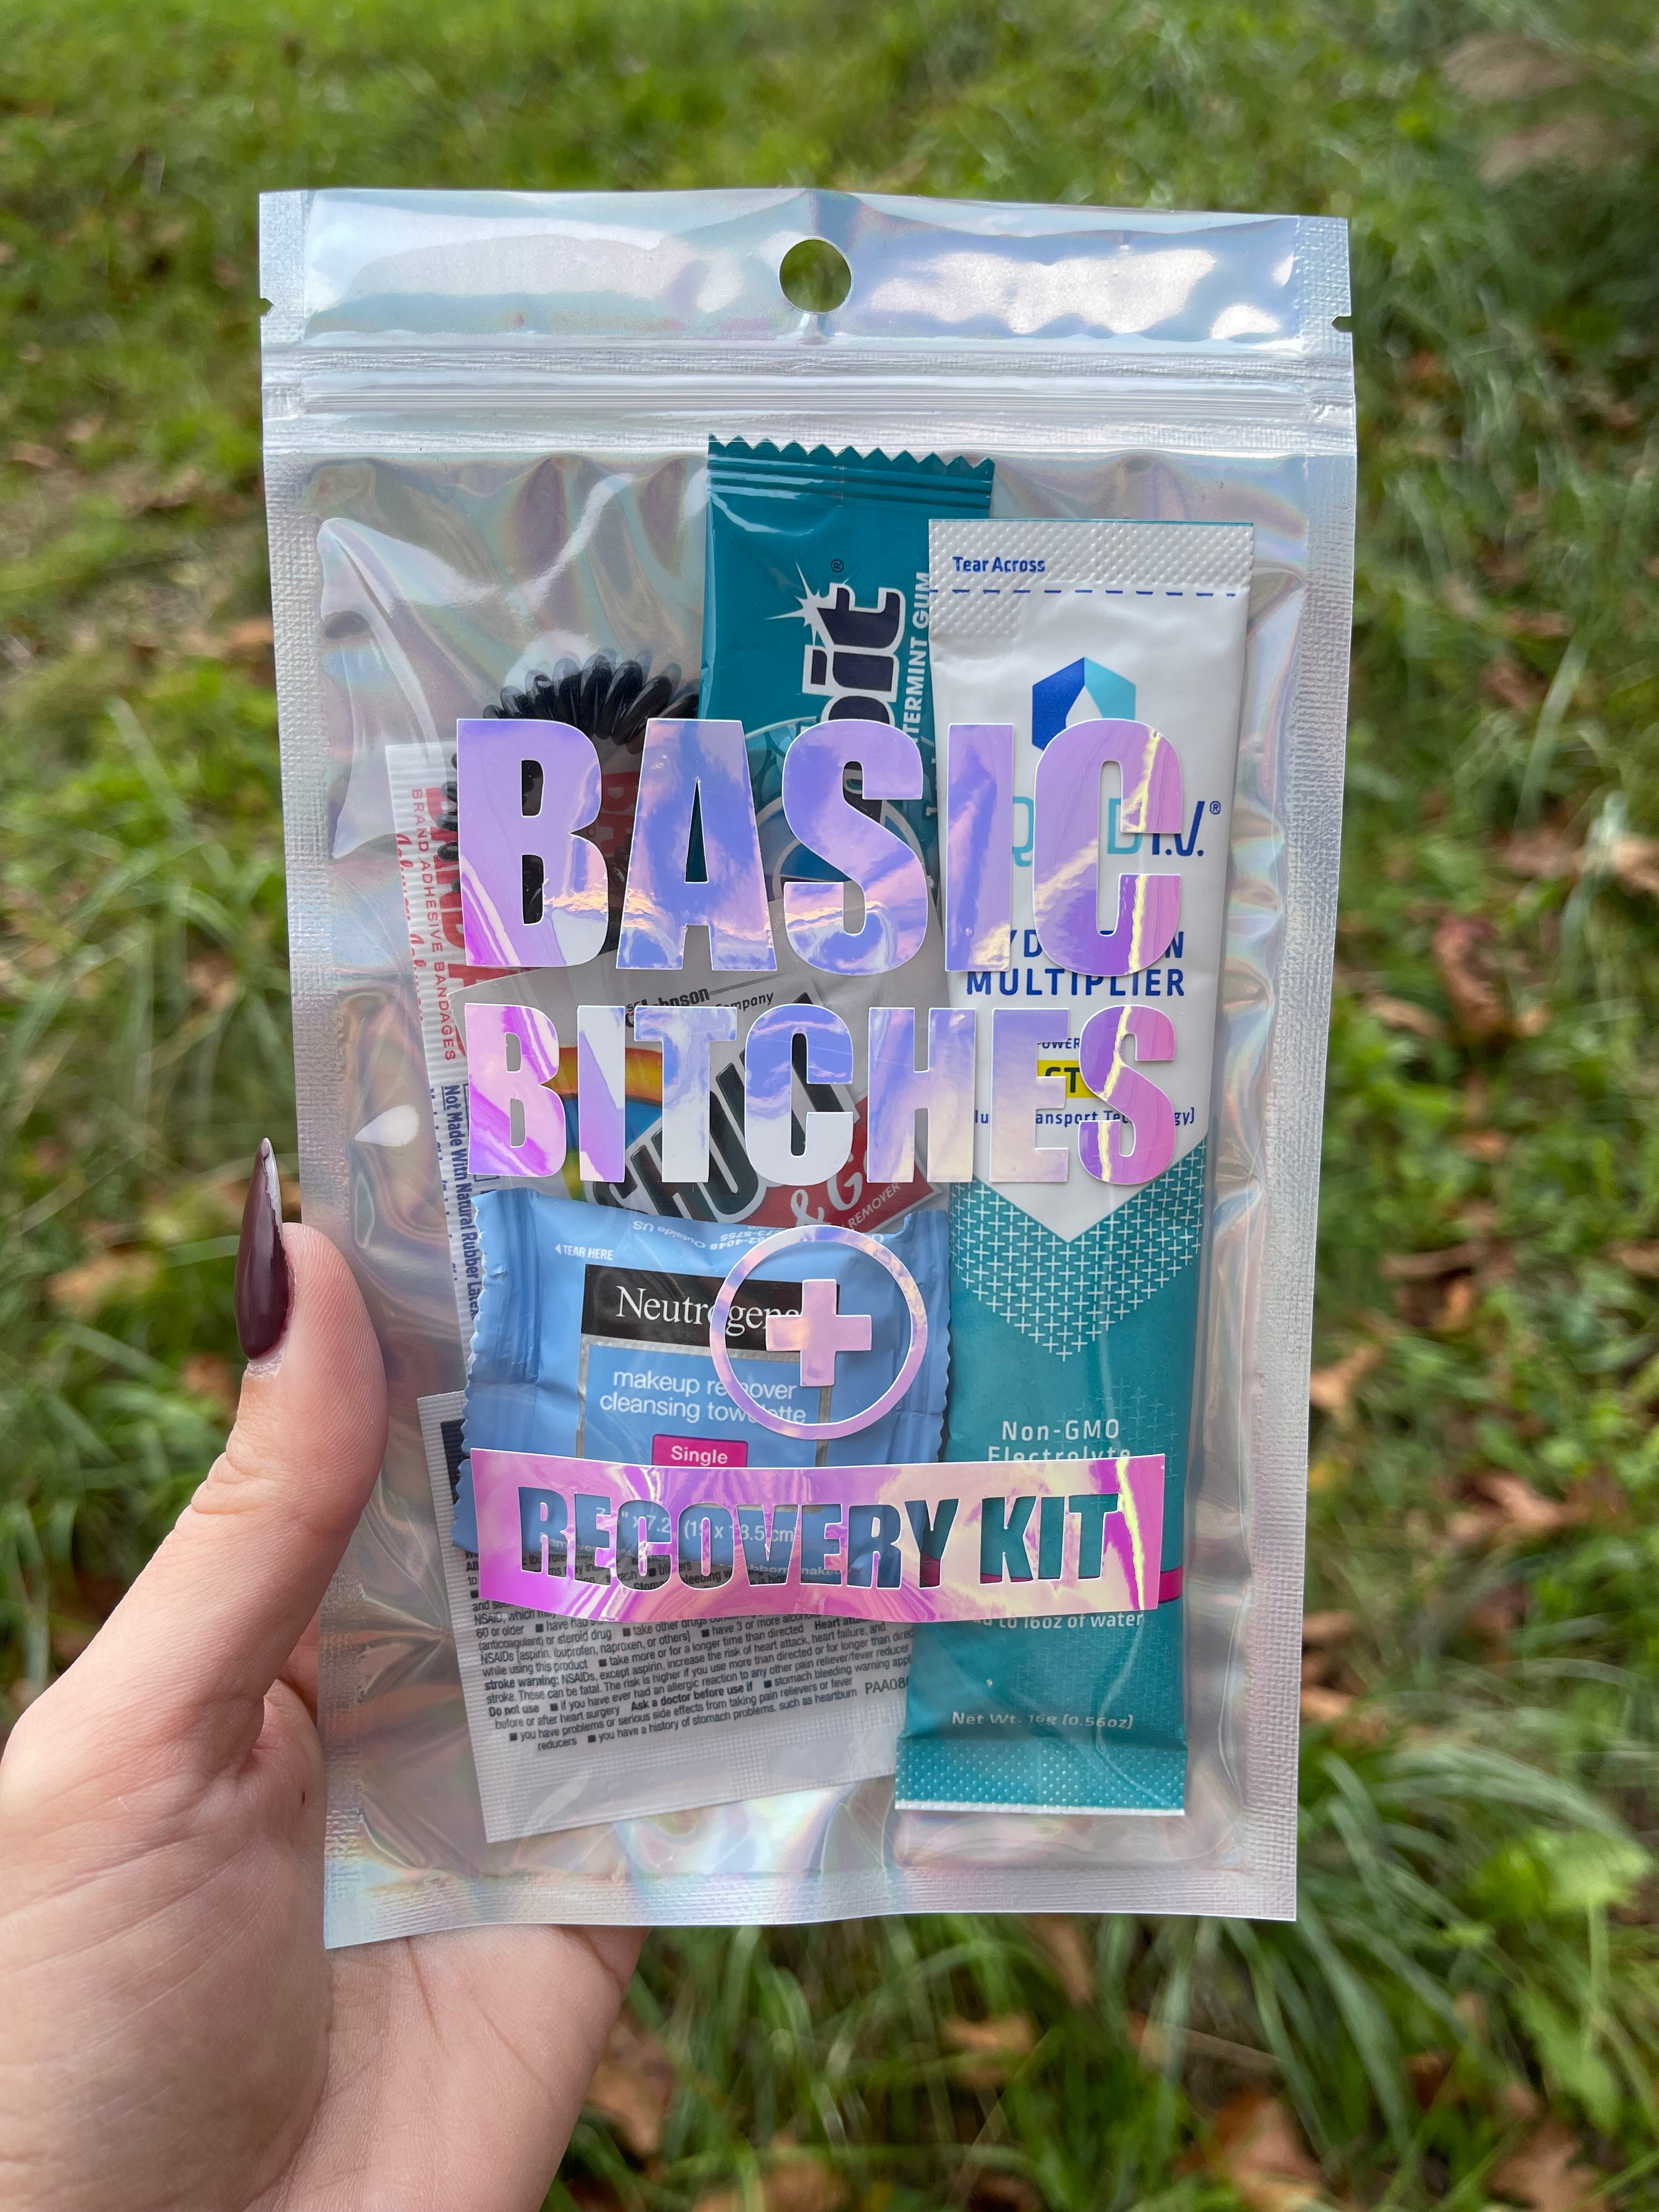 Bachelorette Party Kits | Fun Party Idea | Party Favor | Funny | Oh Shit RecoveryKit | Basic Bitches